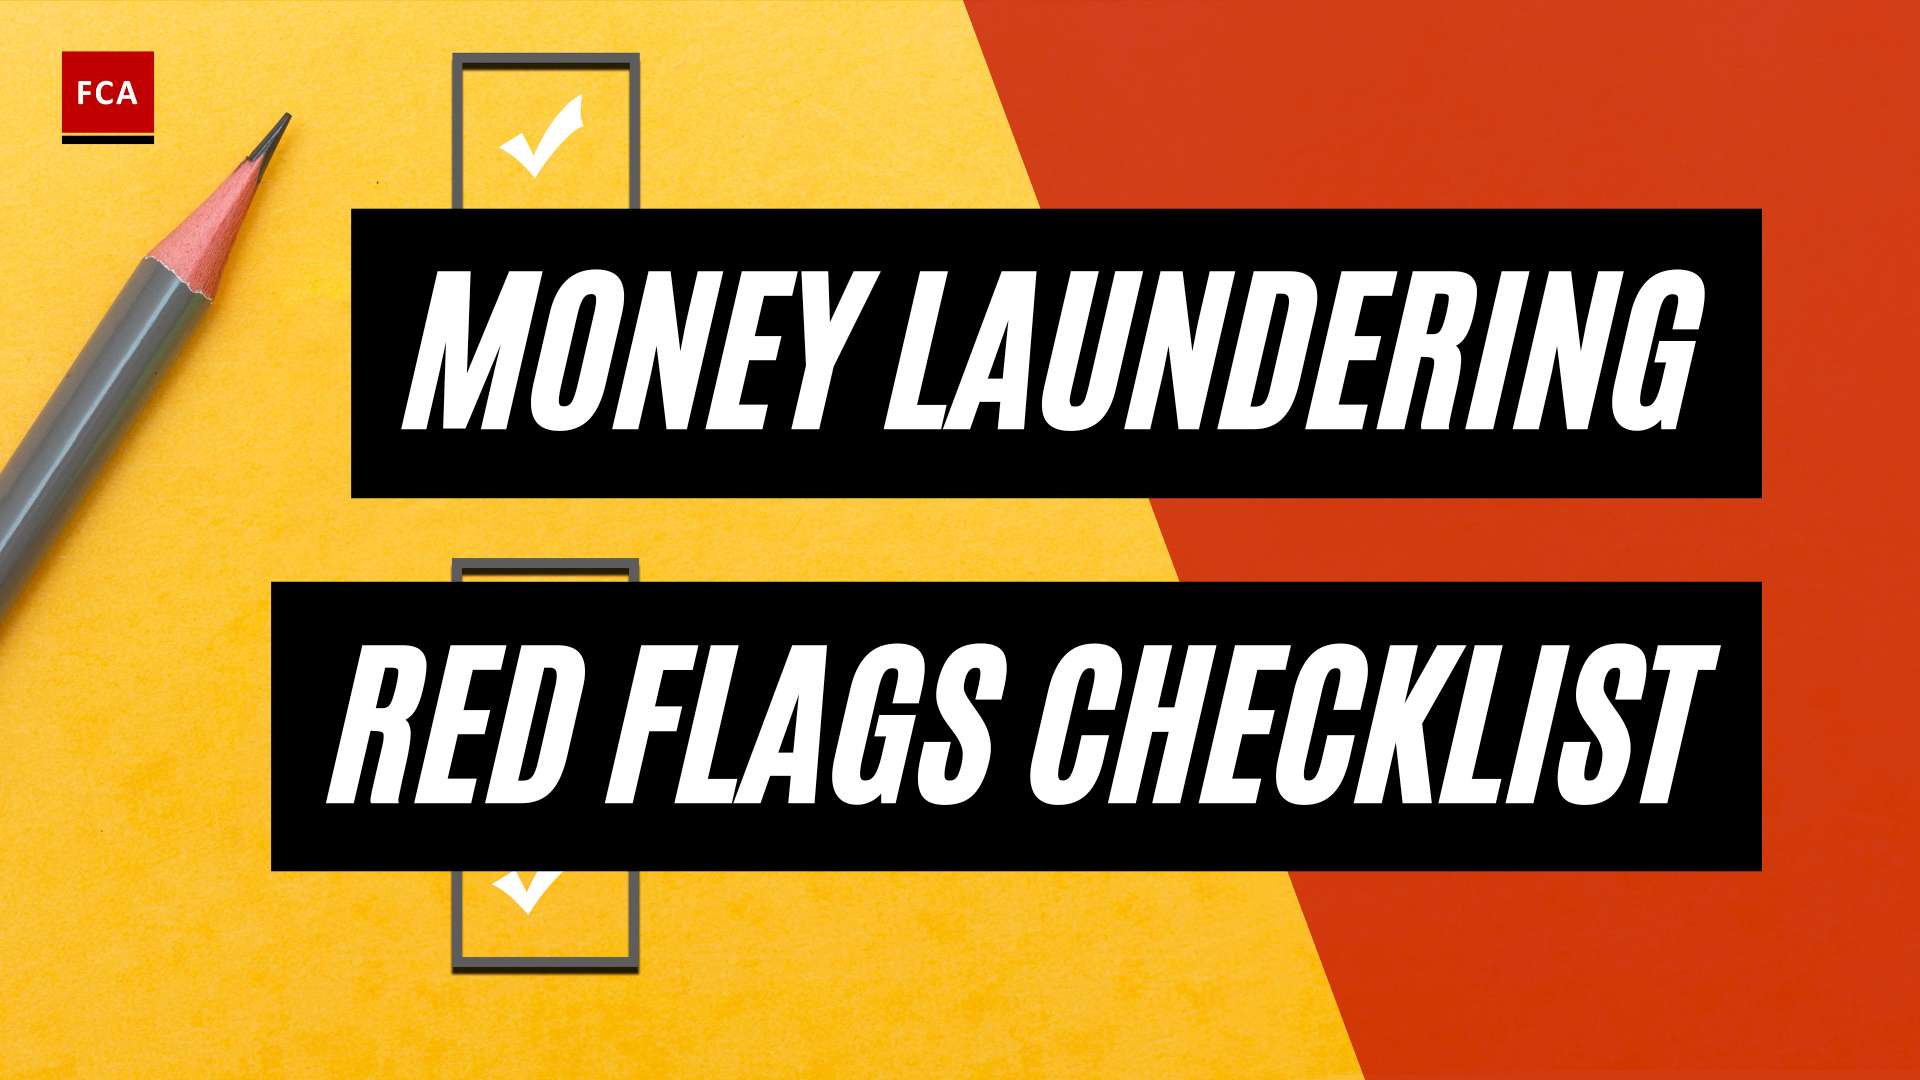 Spotting The Signs: Your Essential Money Laundering Red Flags Checklist